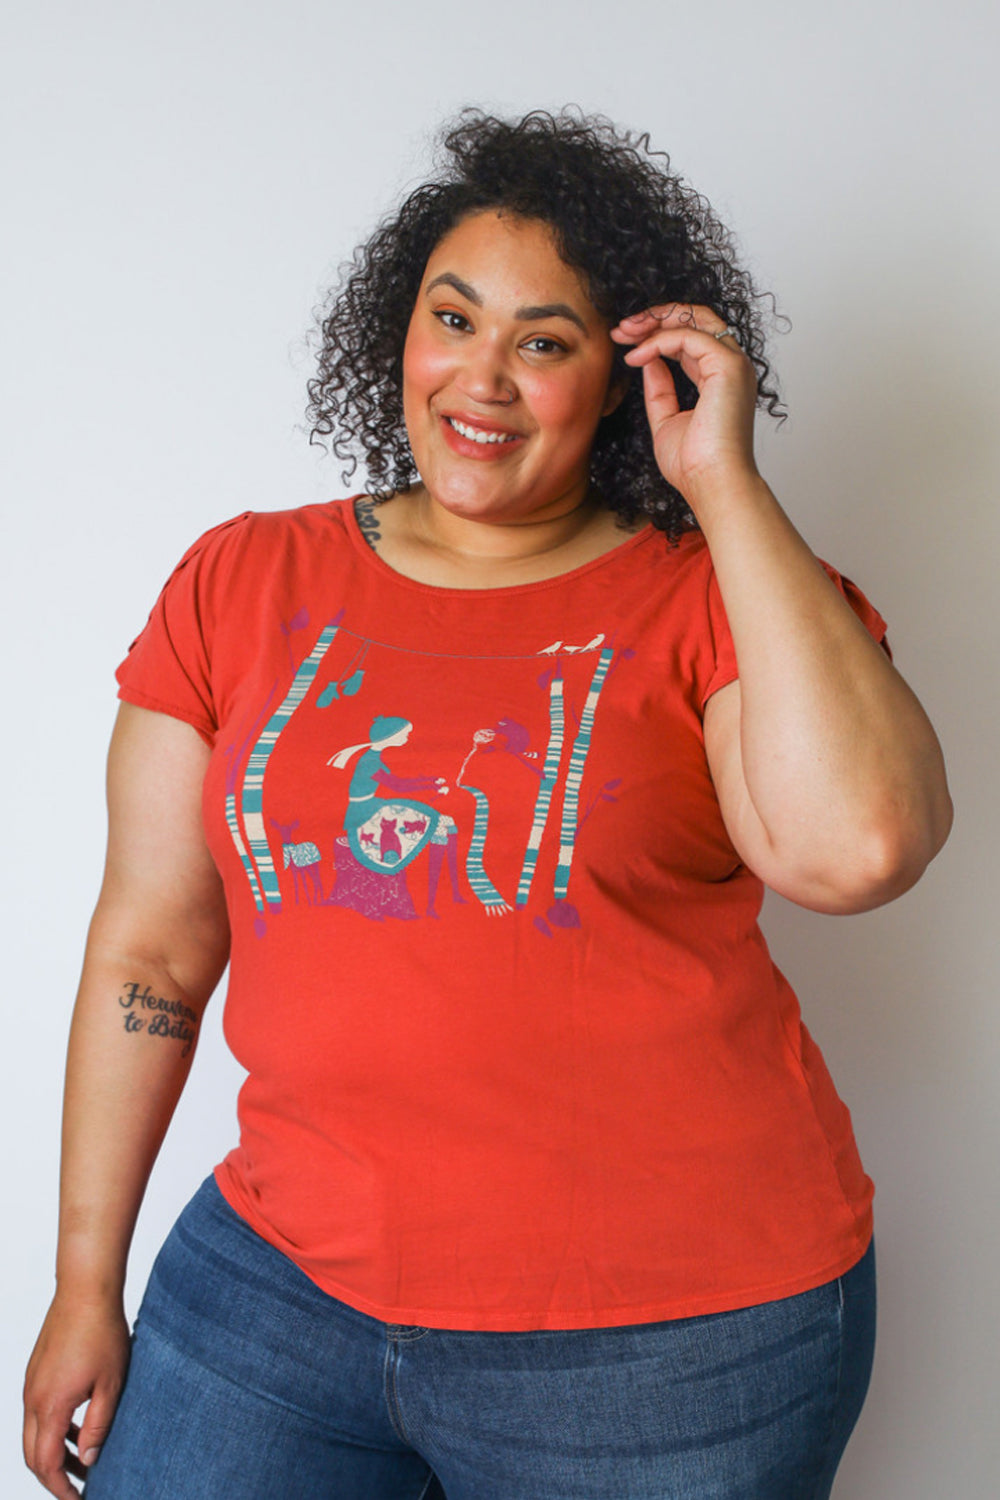 Curly haired model with red t-shirt with knitting girl graphic